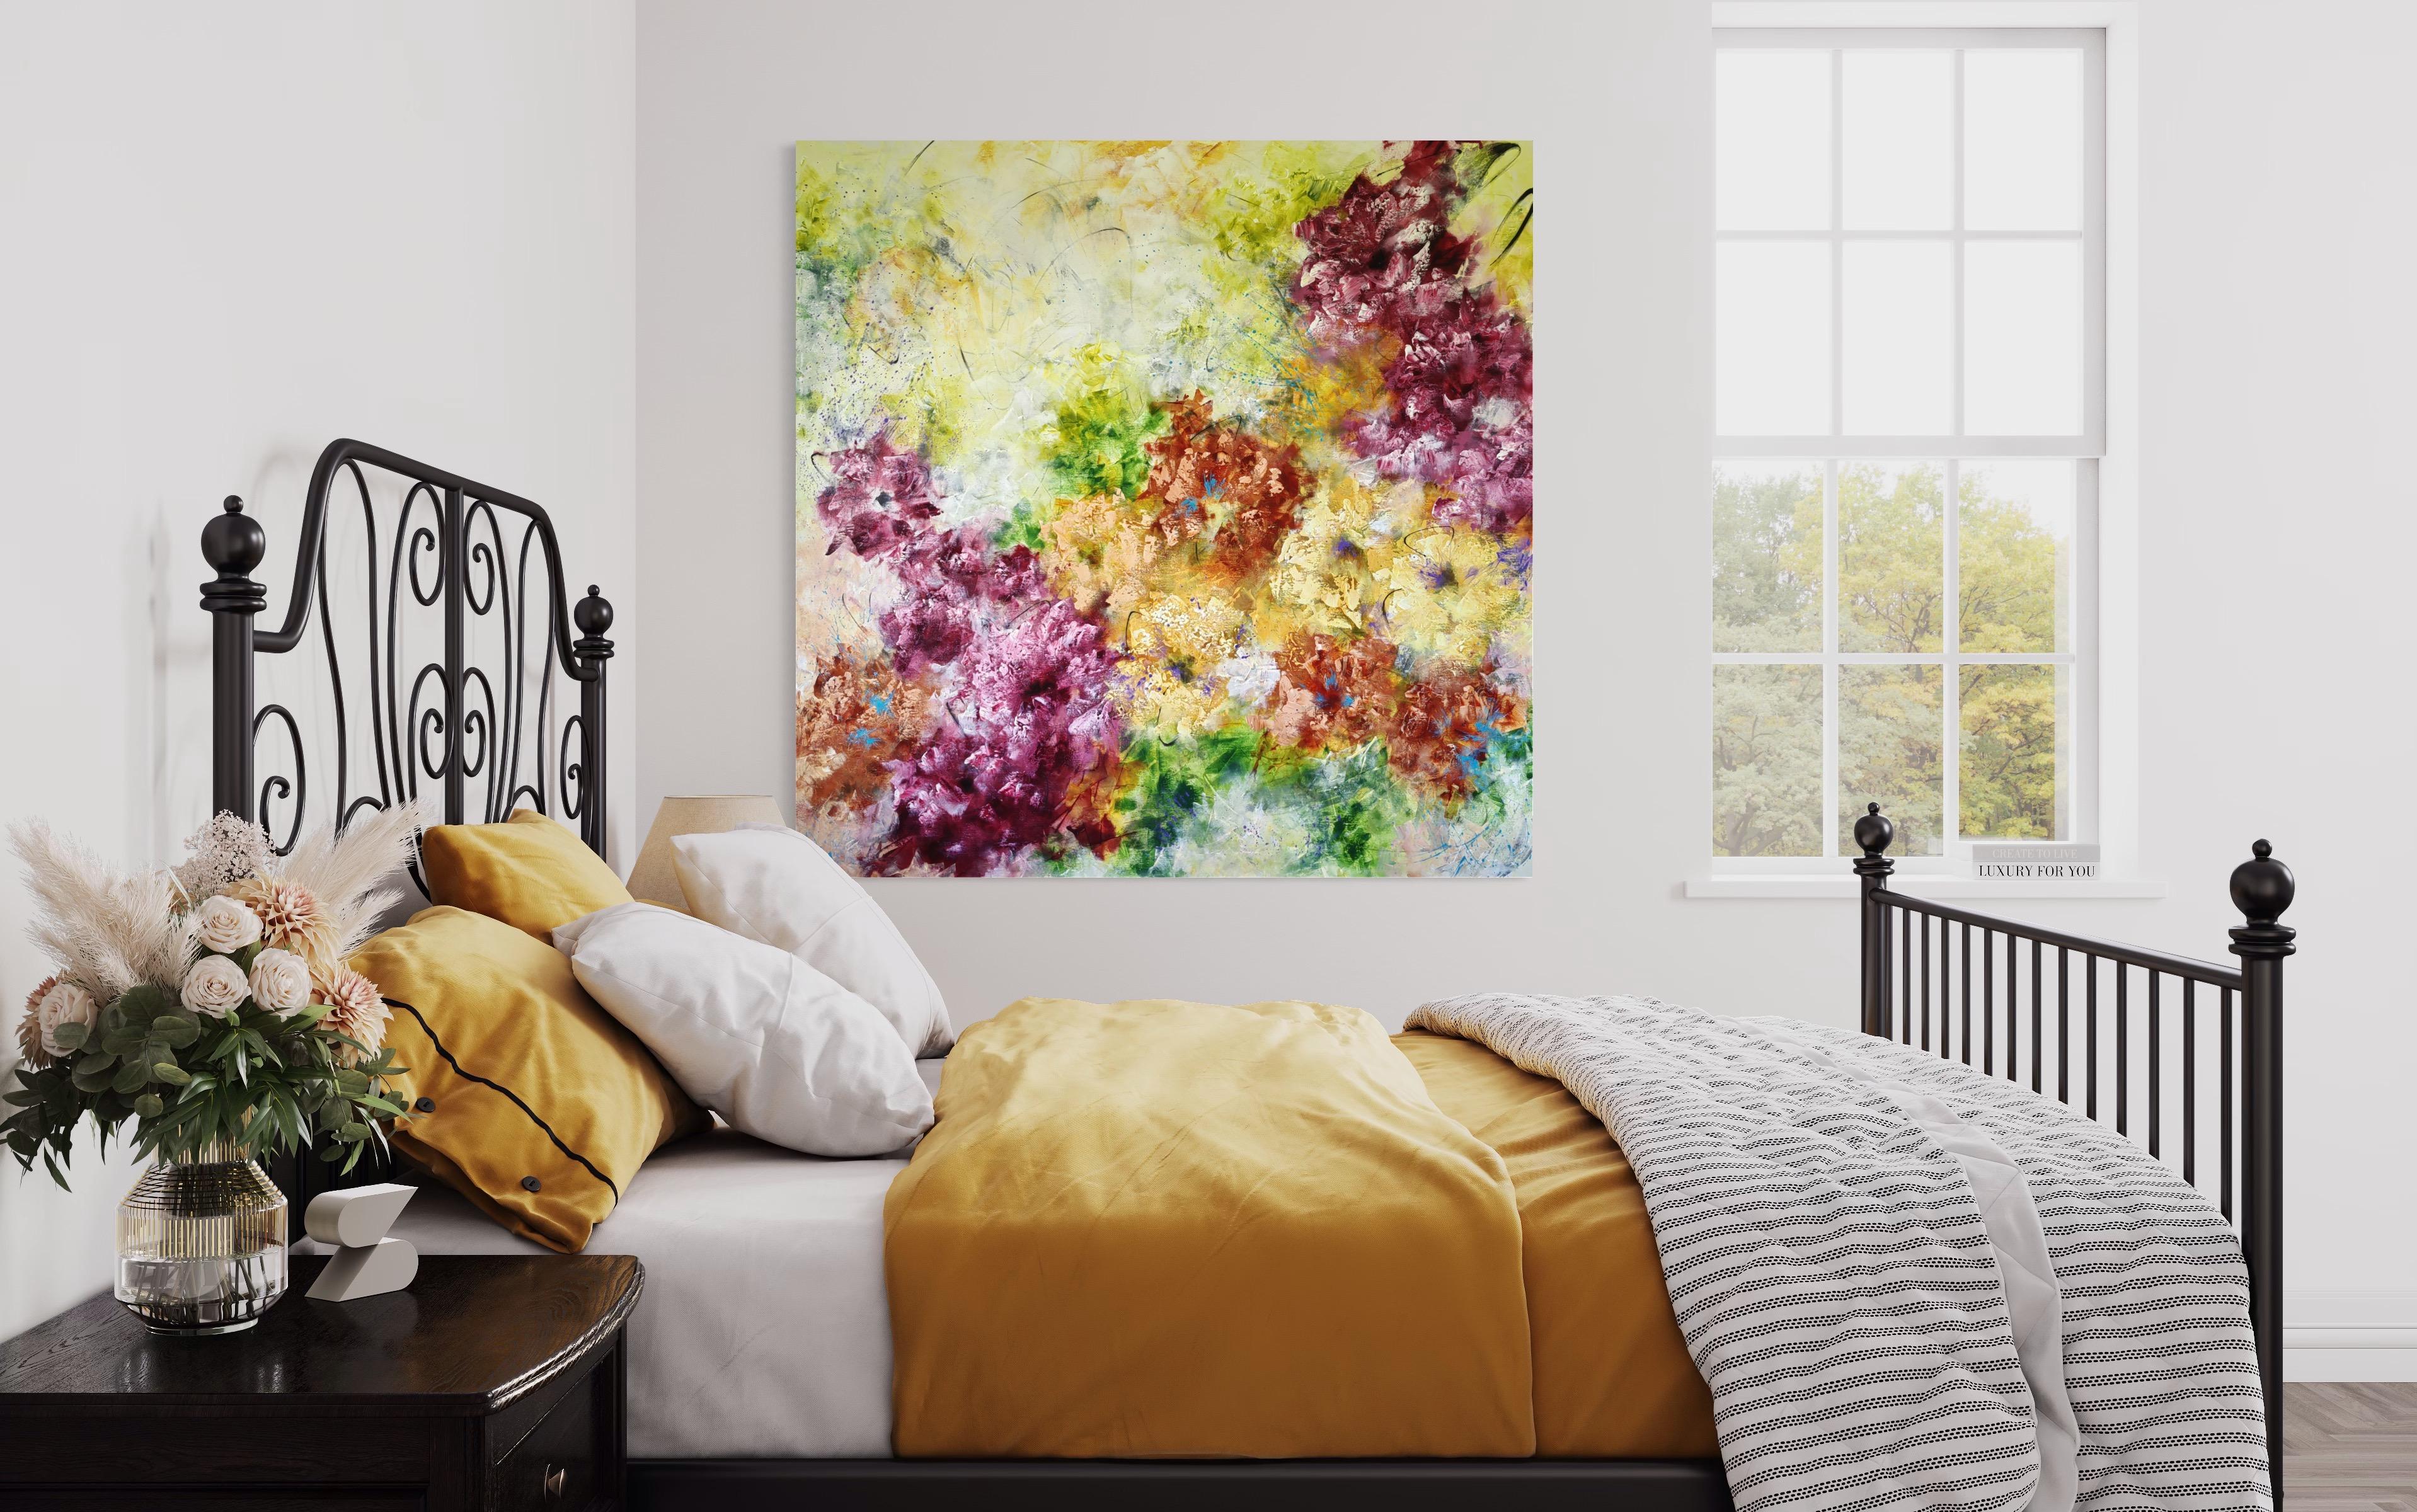 Blooming Abstraction is a vibrant symphony of colours and shapes that brings vitality and energy to any space. This extra-large canvas awakens the senses with an abundance of blooms in yellow, green, orange and crimson. Each brushstroke is a witness